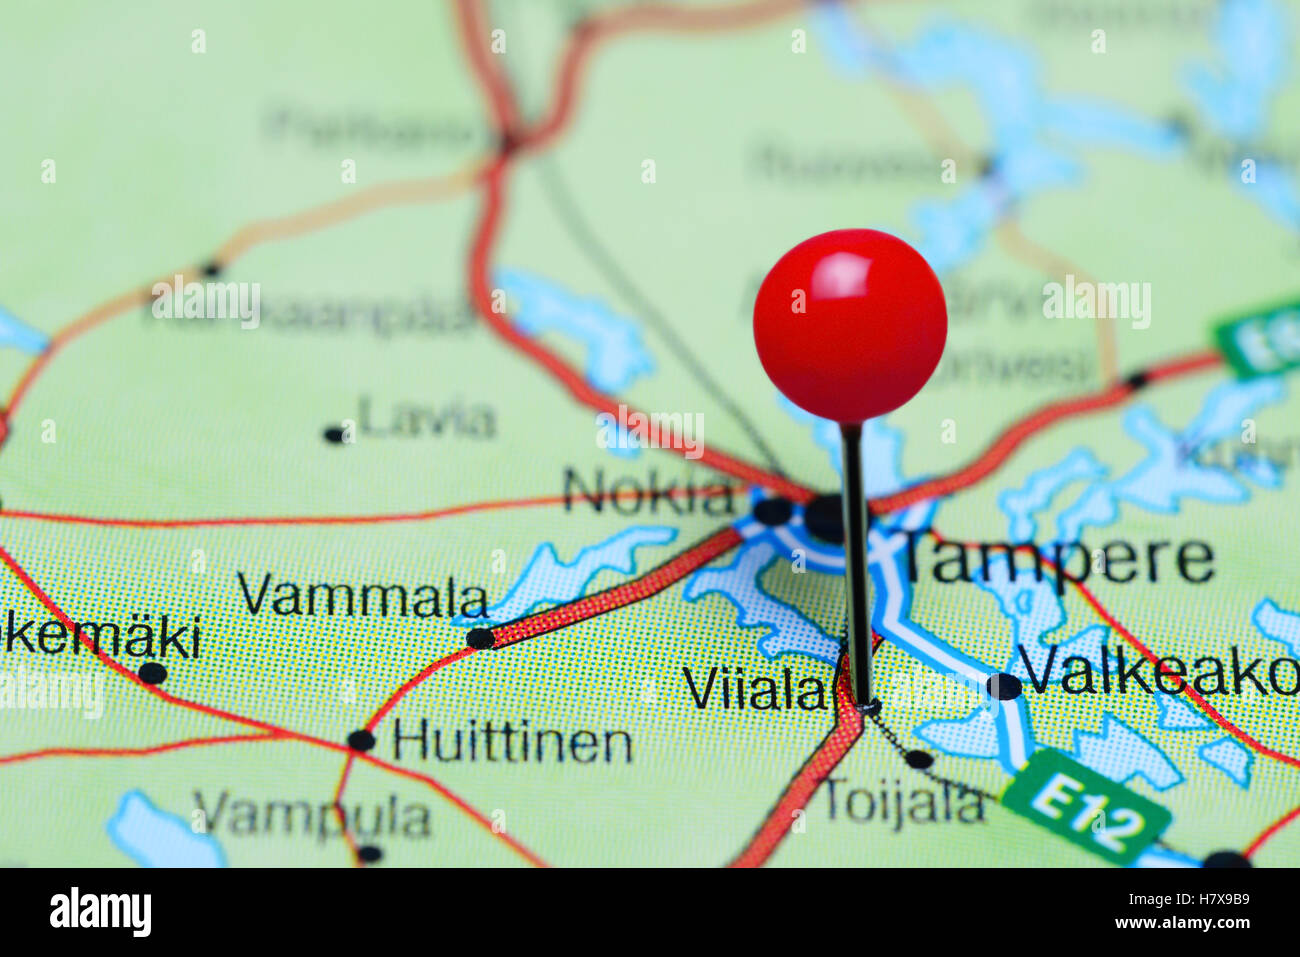 Viiala pinned on a map of Finland Stock Photo